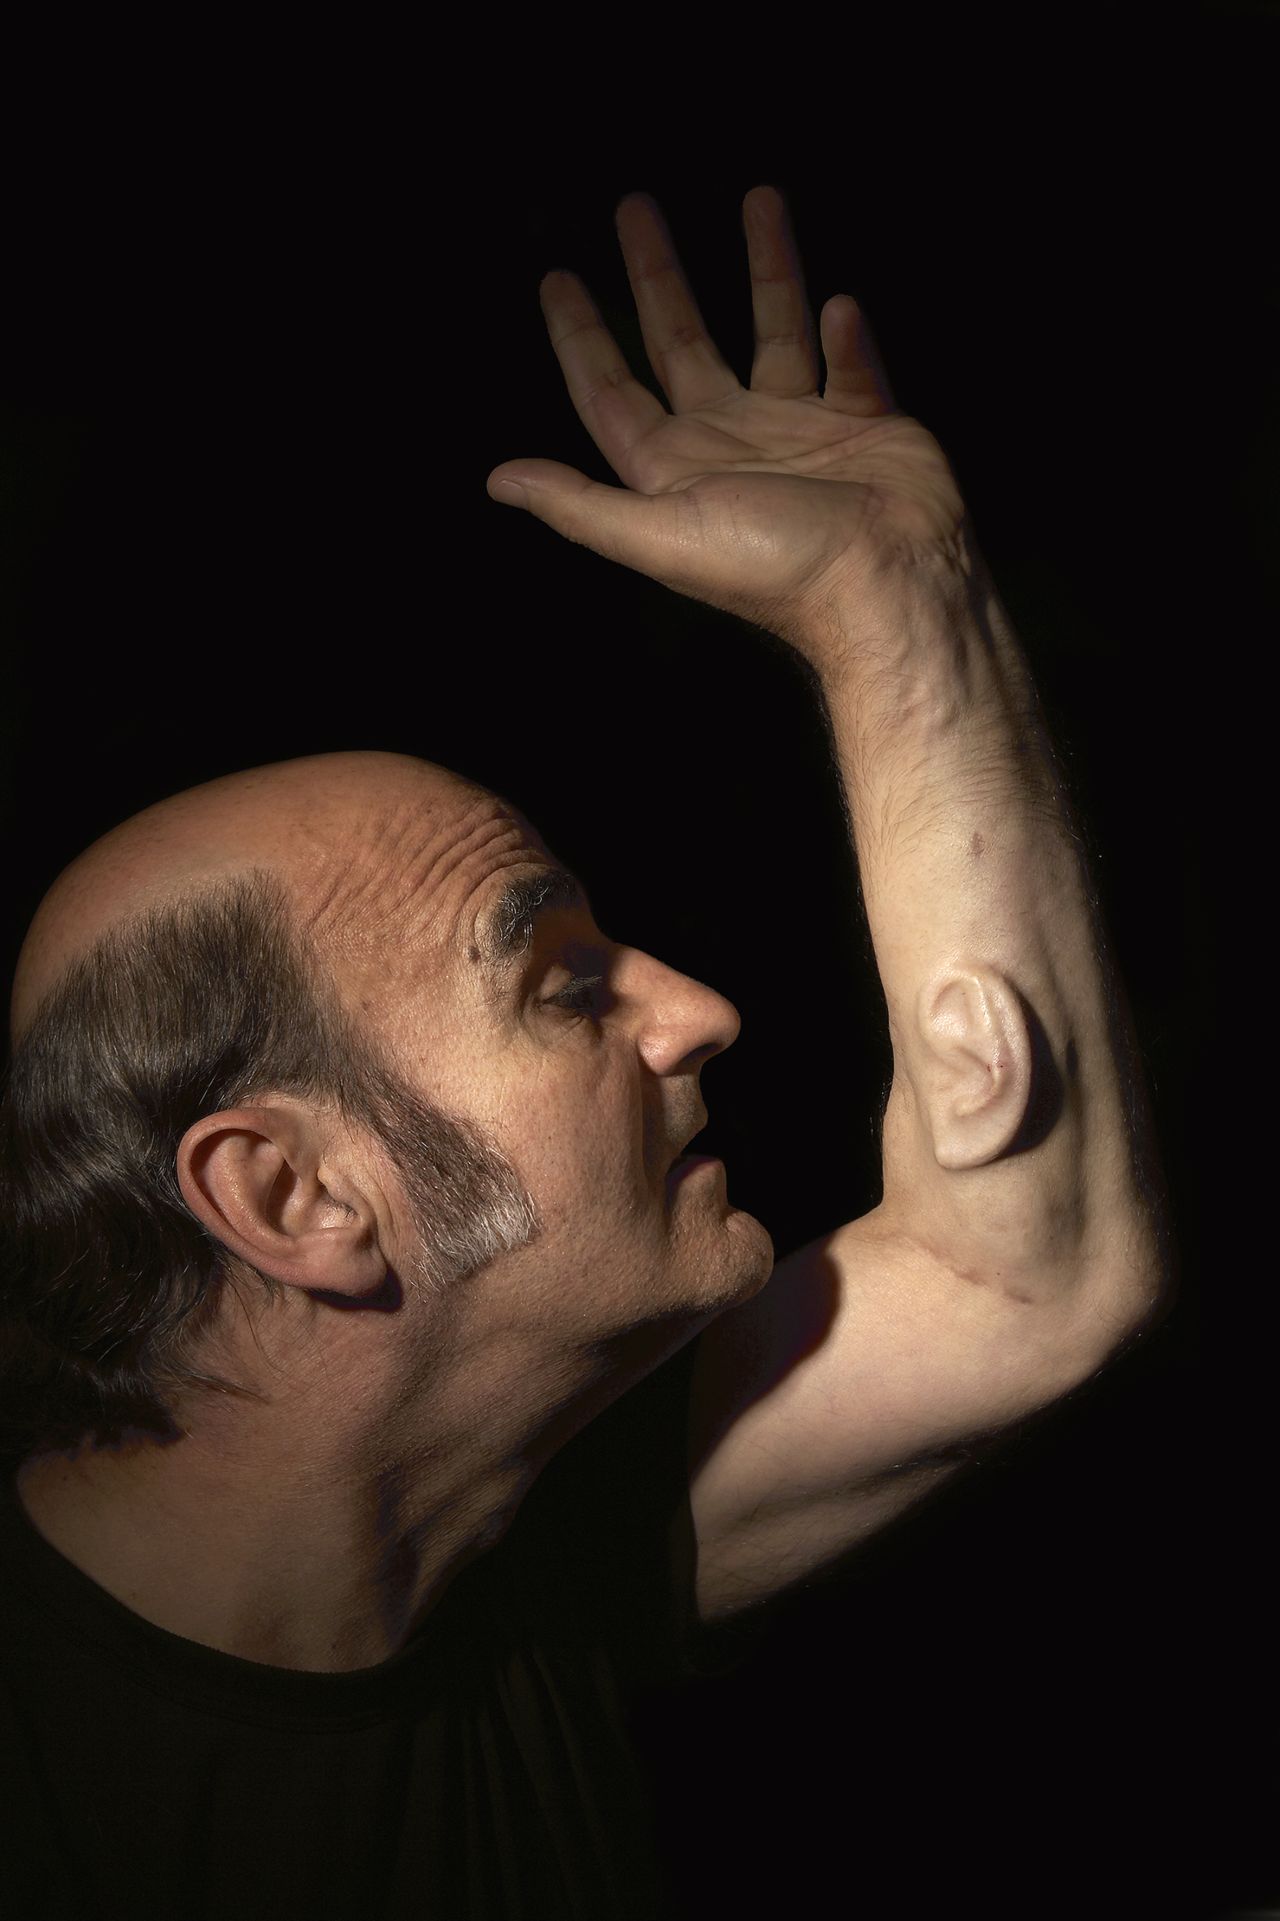 Other artists have also experimented in bio-art. Award-winning Australian performance artist Stelarc, for example, surgically implanted an ear into his arm. 